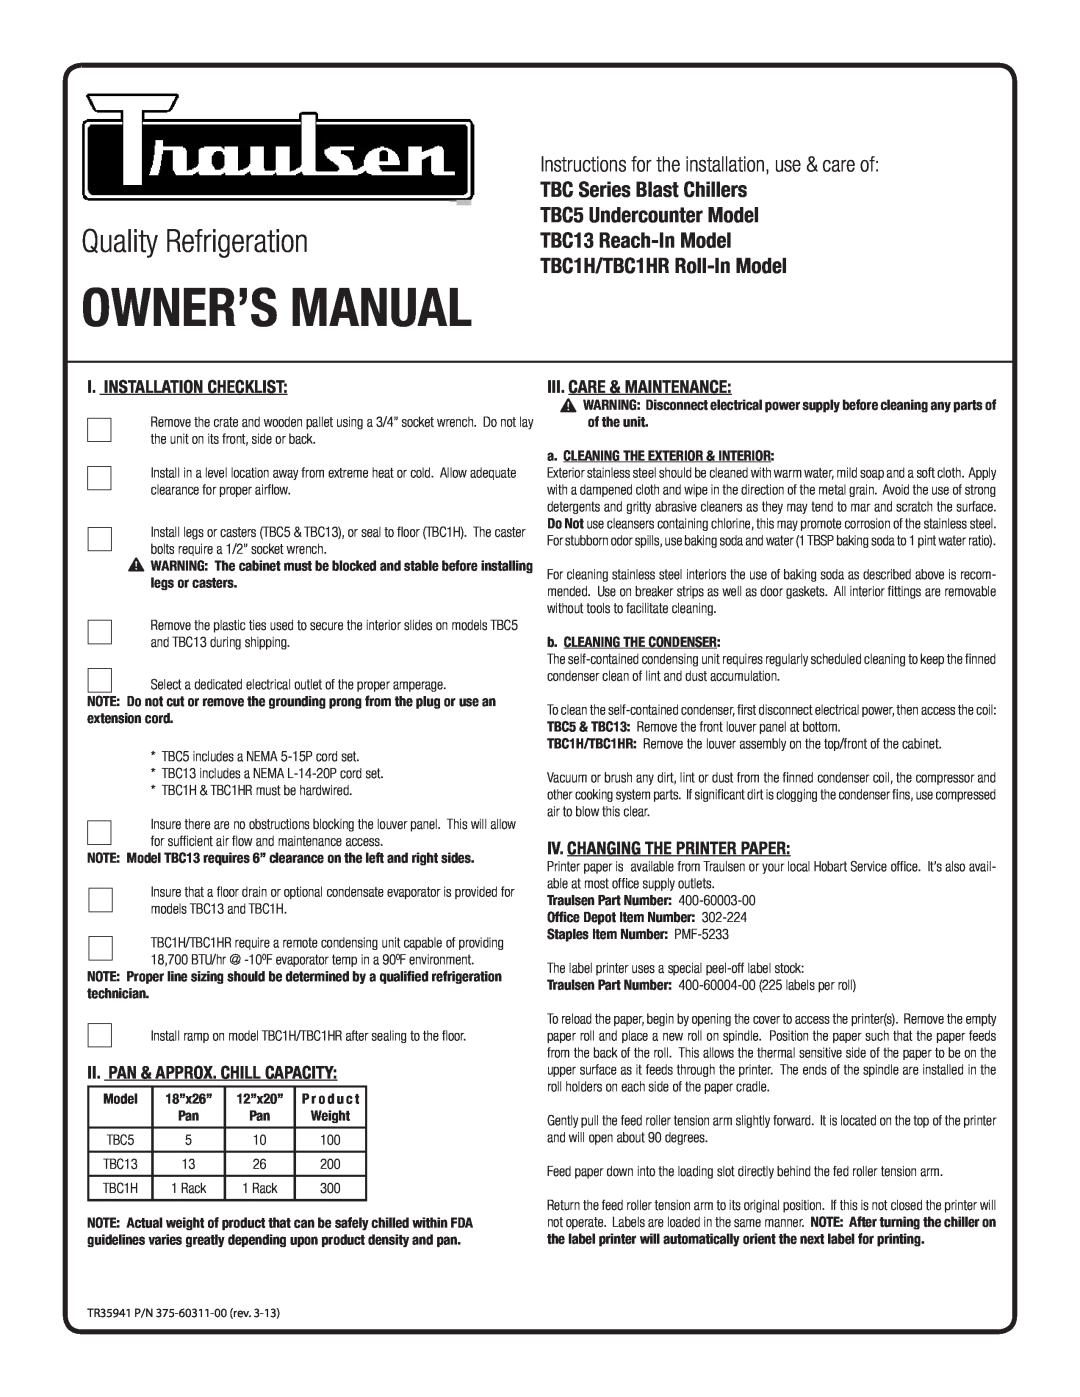 Traulsen TBC1HR, TBC5 owner manual I. Installation Checklist, Ii. Pan & Approx. Chill Capacity, Iii. Care & Maintenance 